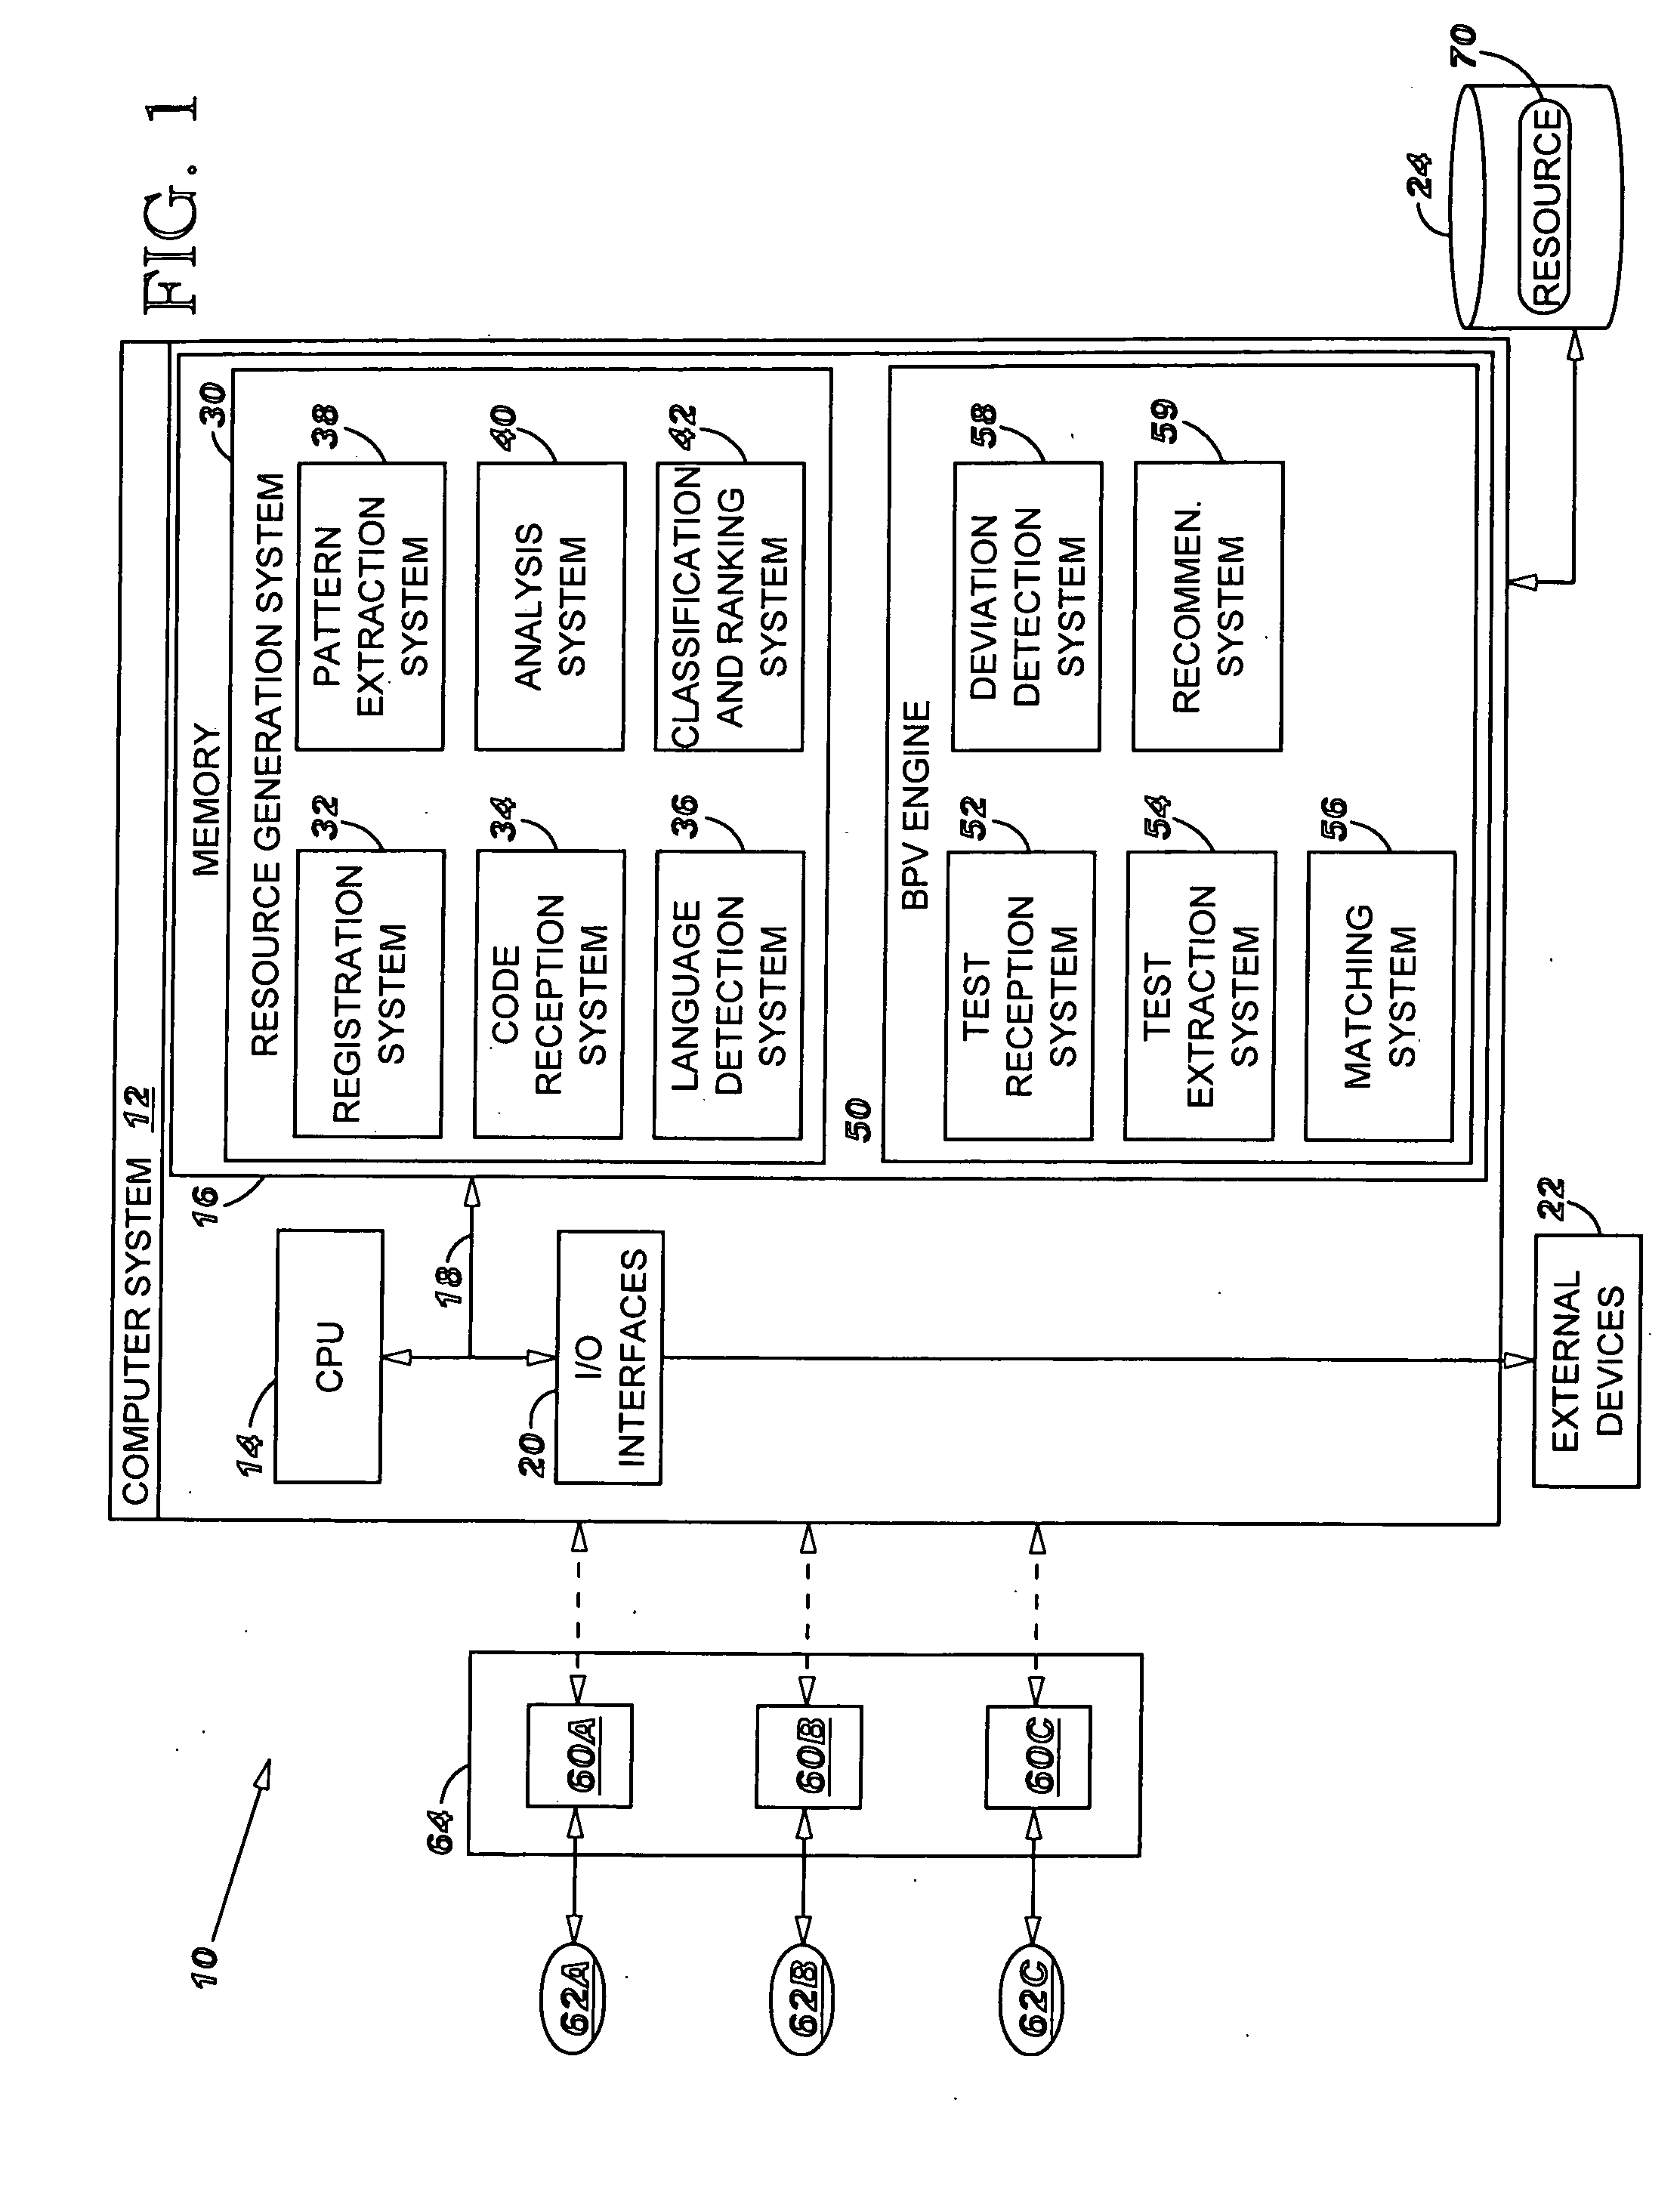 Method, system and program product for detecting software development best practice violations in a code sharing system